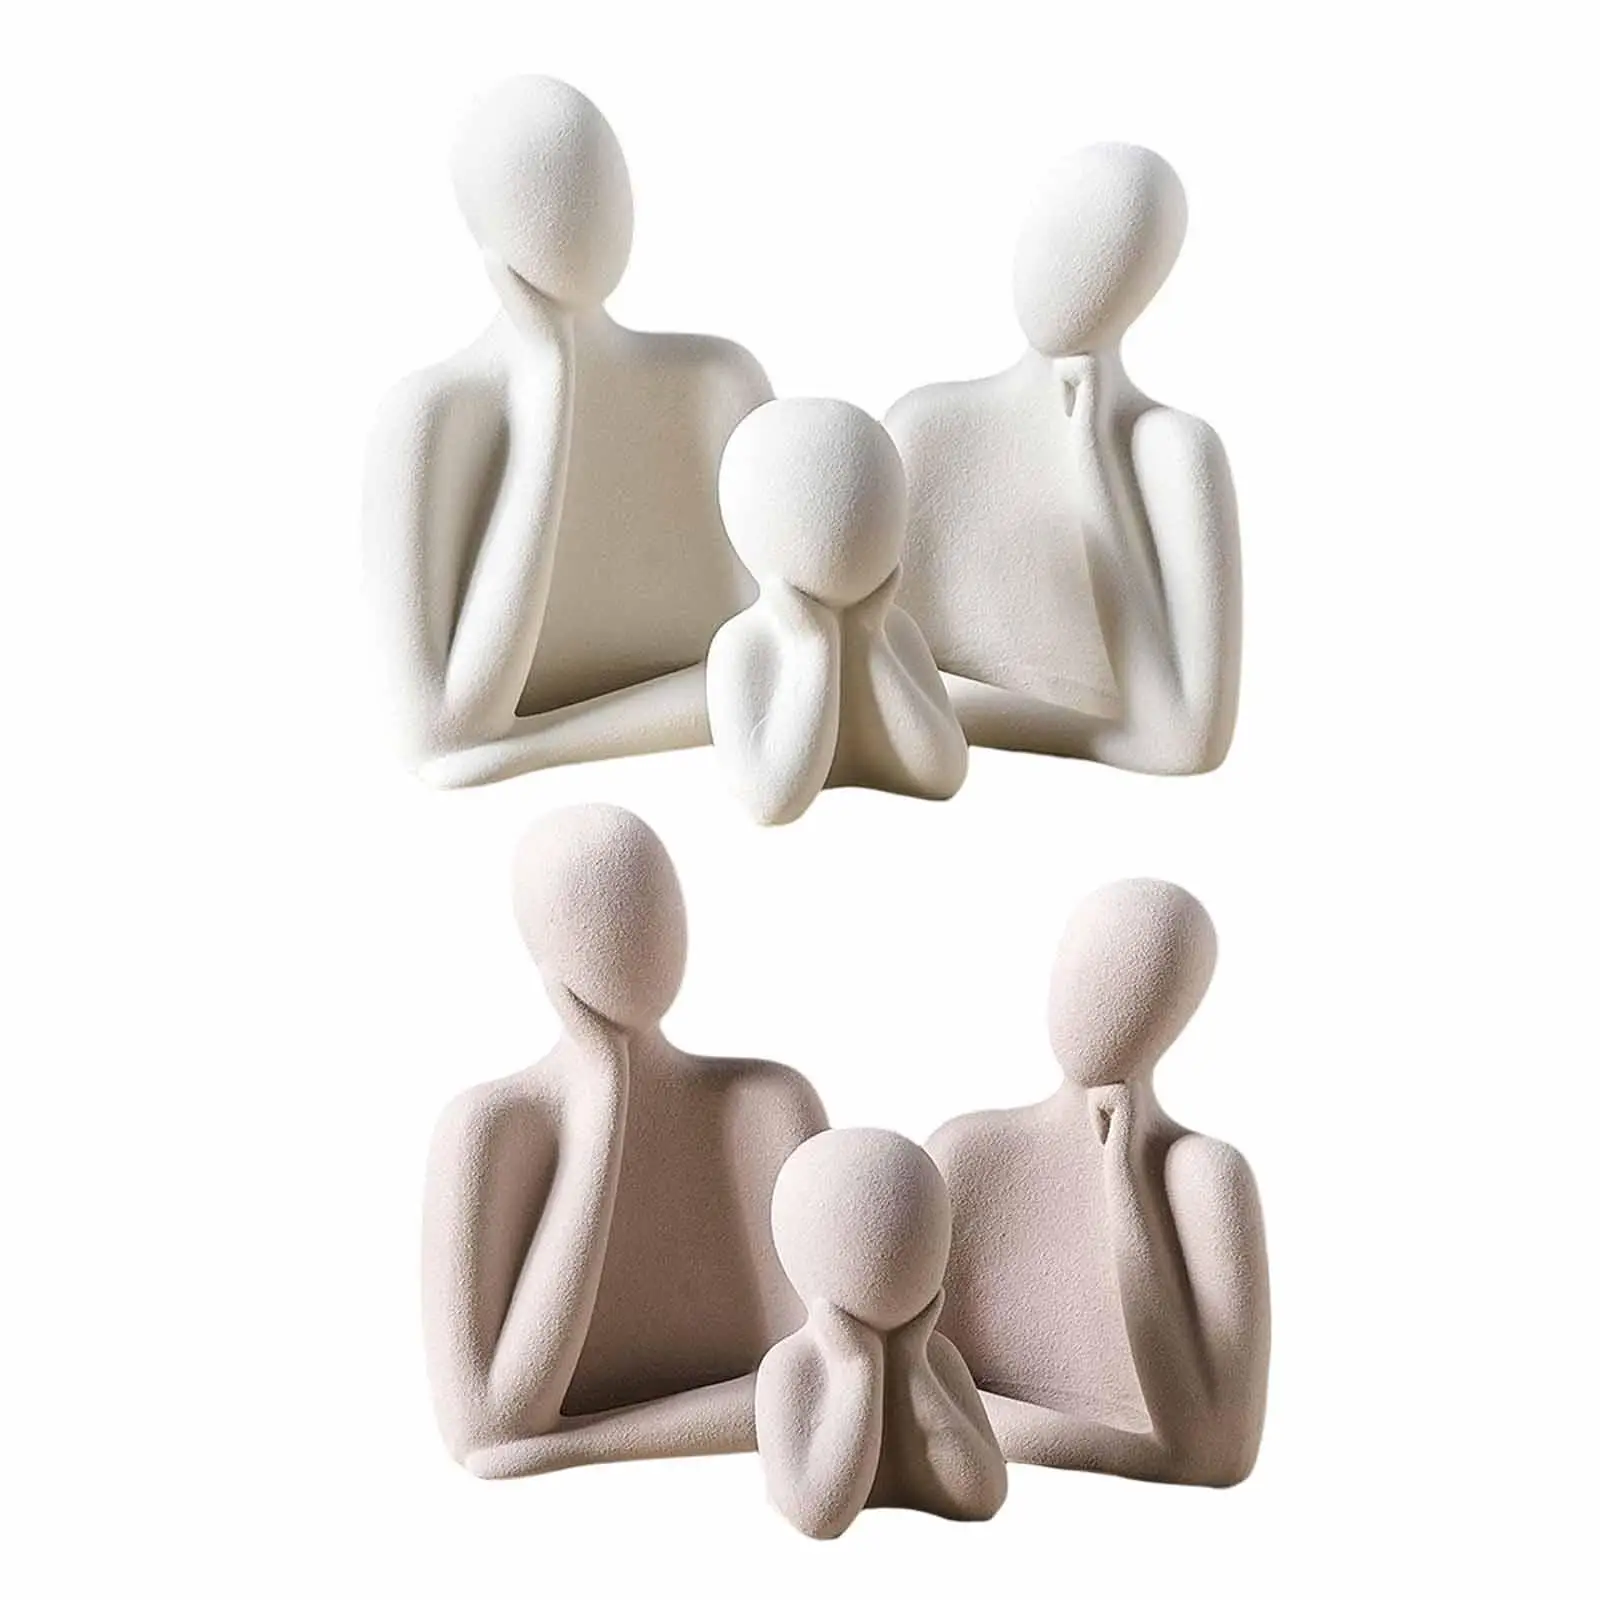 

3Pcs Modern Abstract Family Statues Crafts Figurine Home Decor Living Room